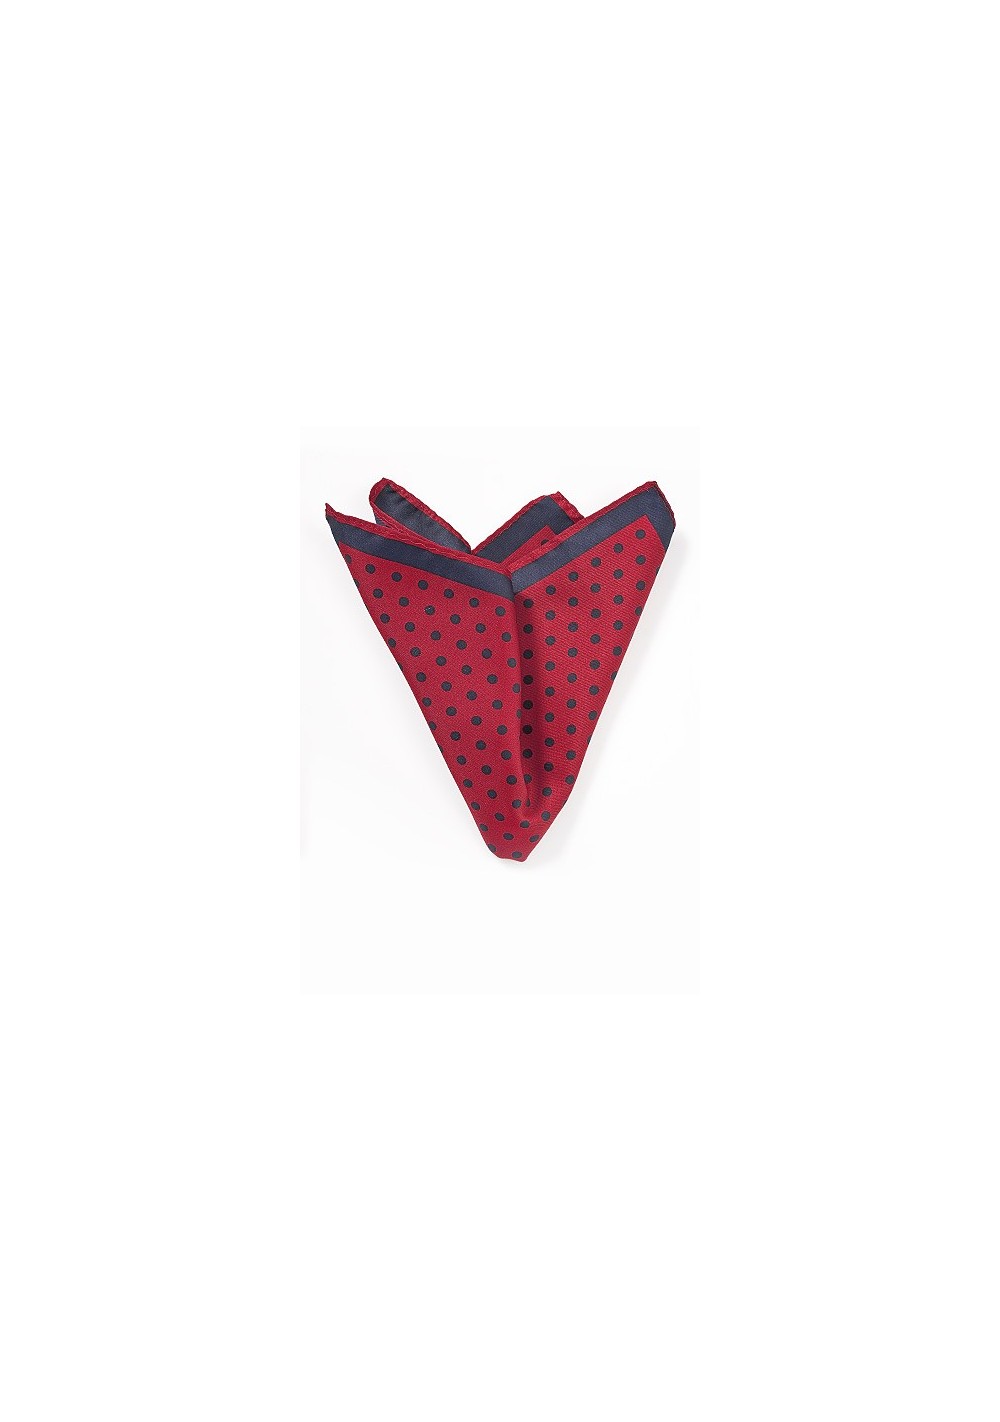 Red and Navy Pocket Square